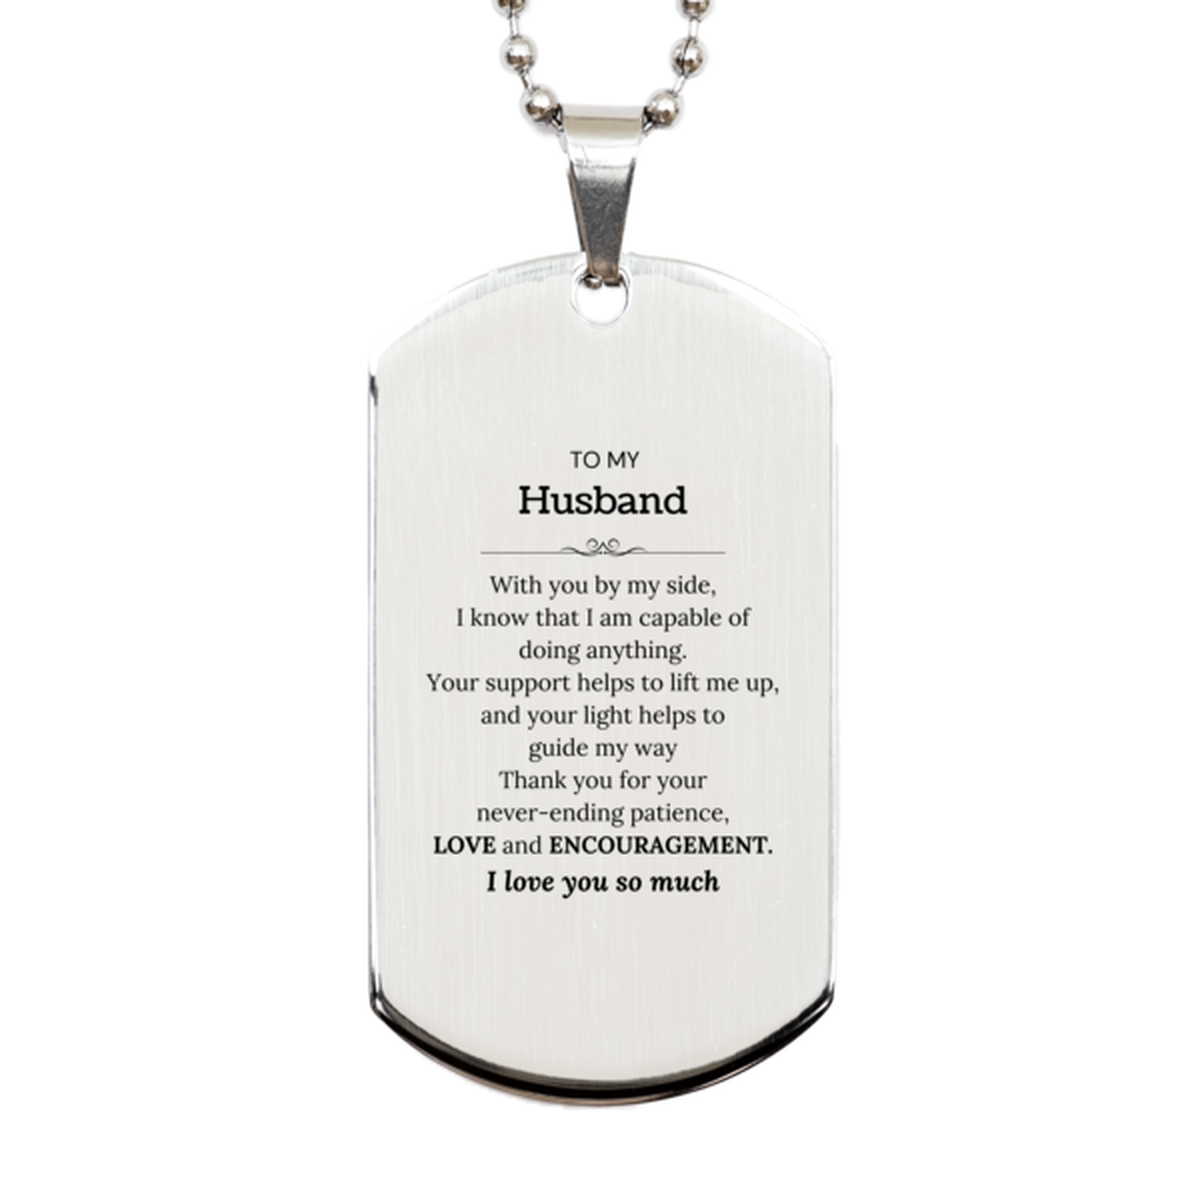 Appreciation Husband Silver Dog Tag Gifts, To My Husband Birthday Christmas Wedding Keepsake Gifts for Husband With you by my side, I know that I am capable of doing anything. I love you so much